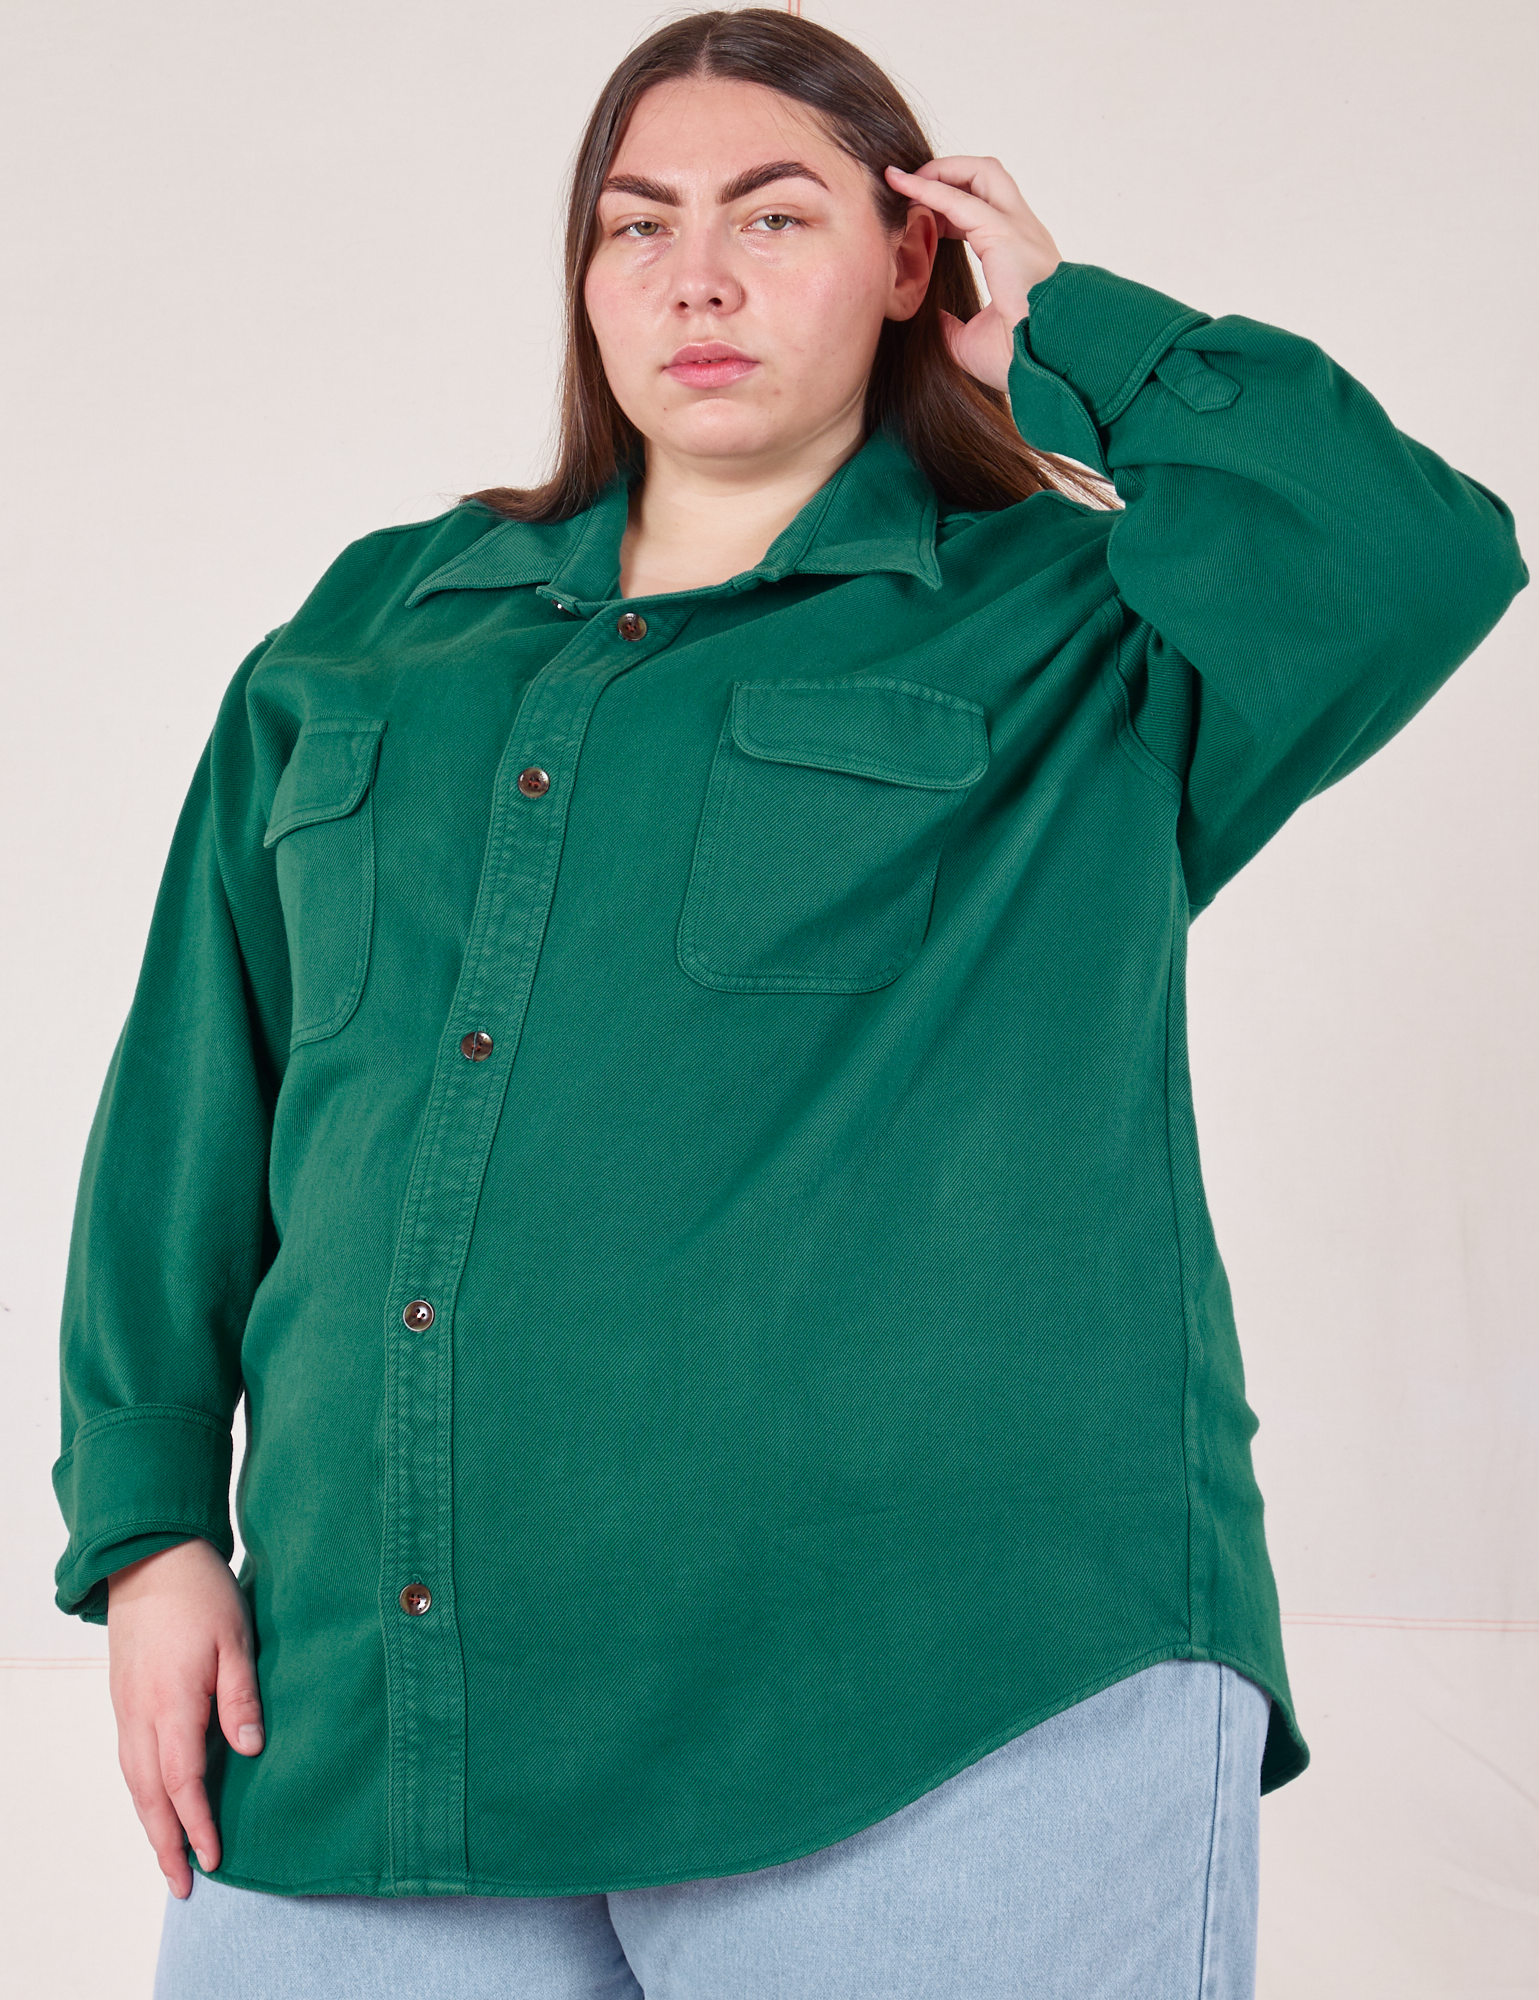 Marielena is 5&#39;8&quot; and wearing XL Flannel Overshirt in Hunter Green